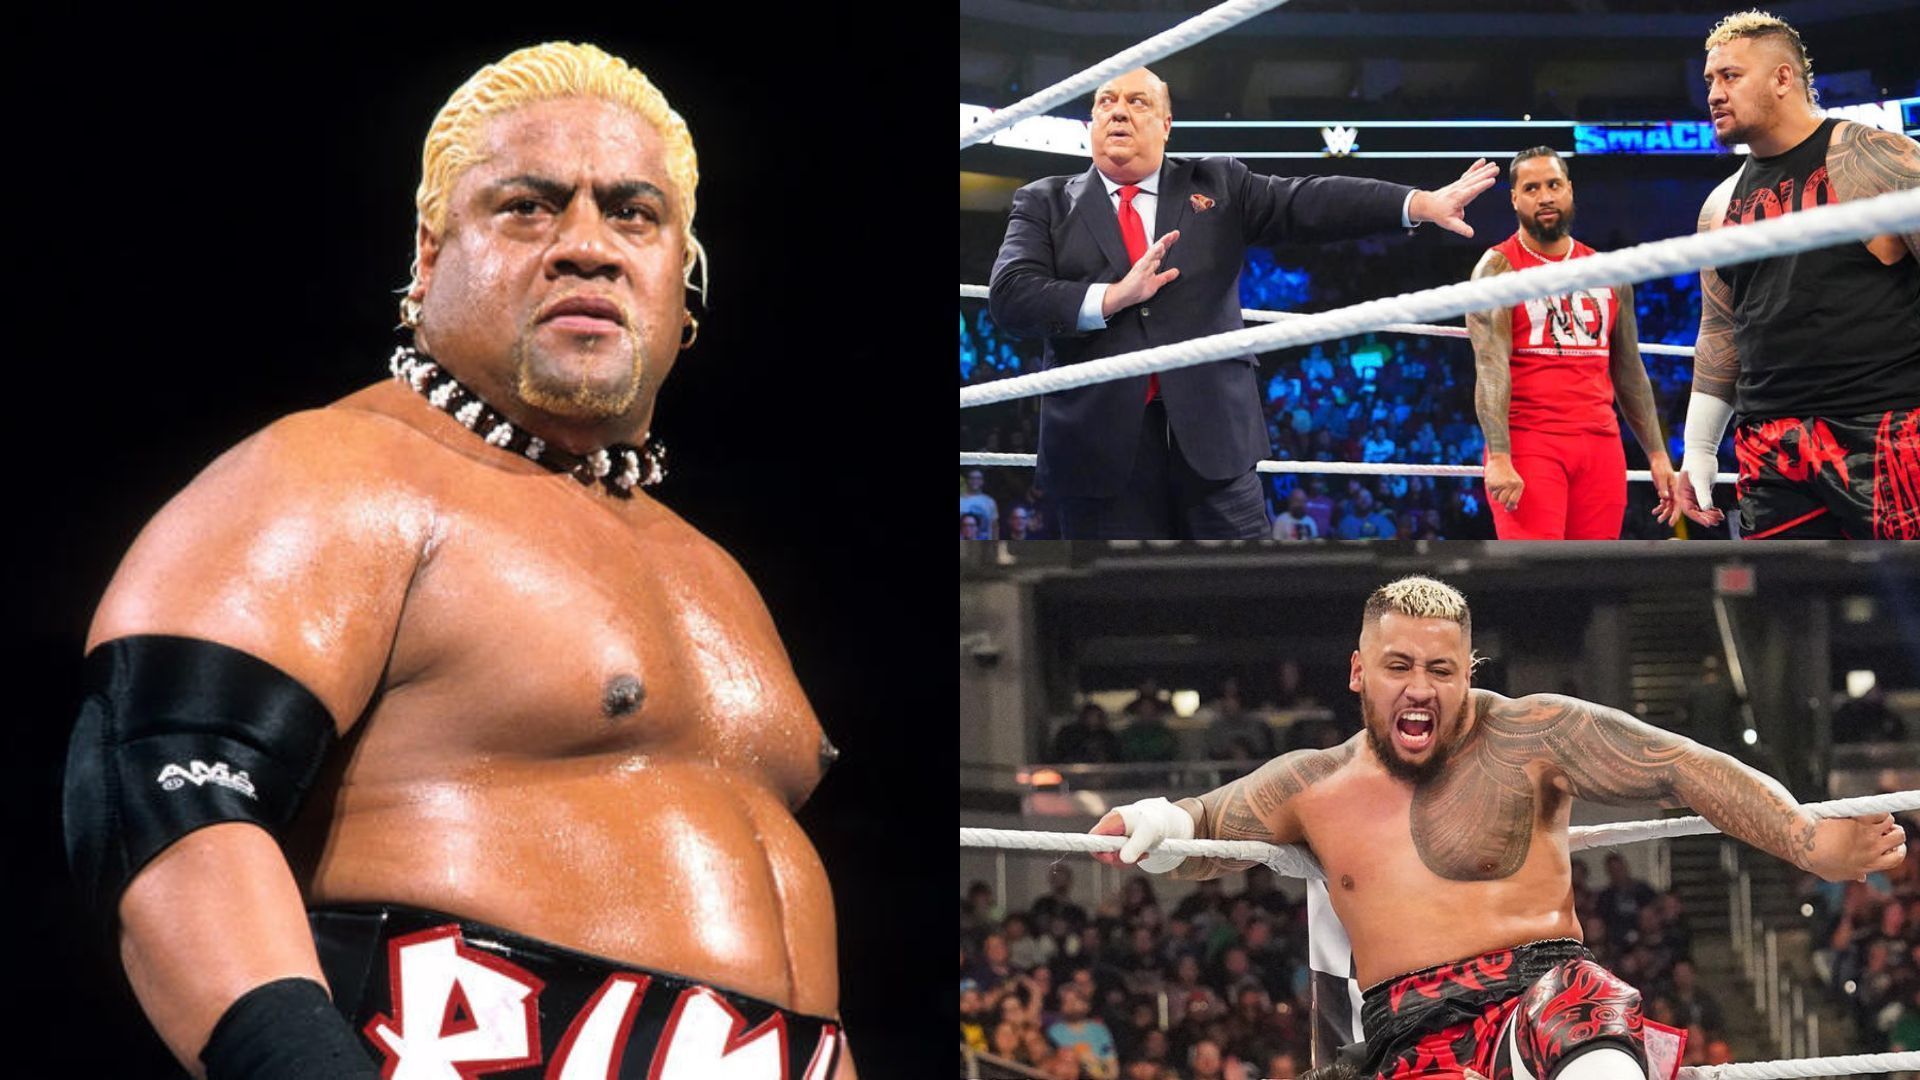 Rikishi is a legendary member of the Anoa